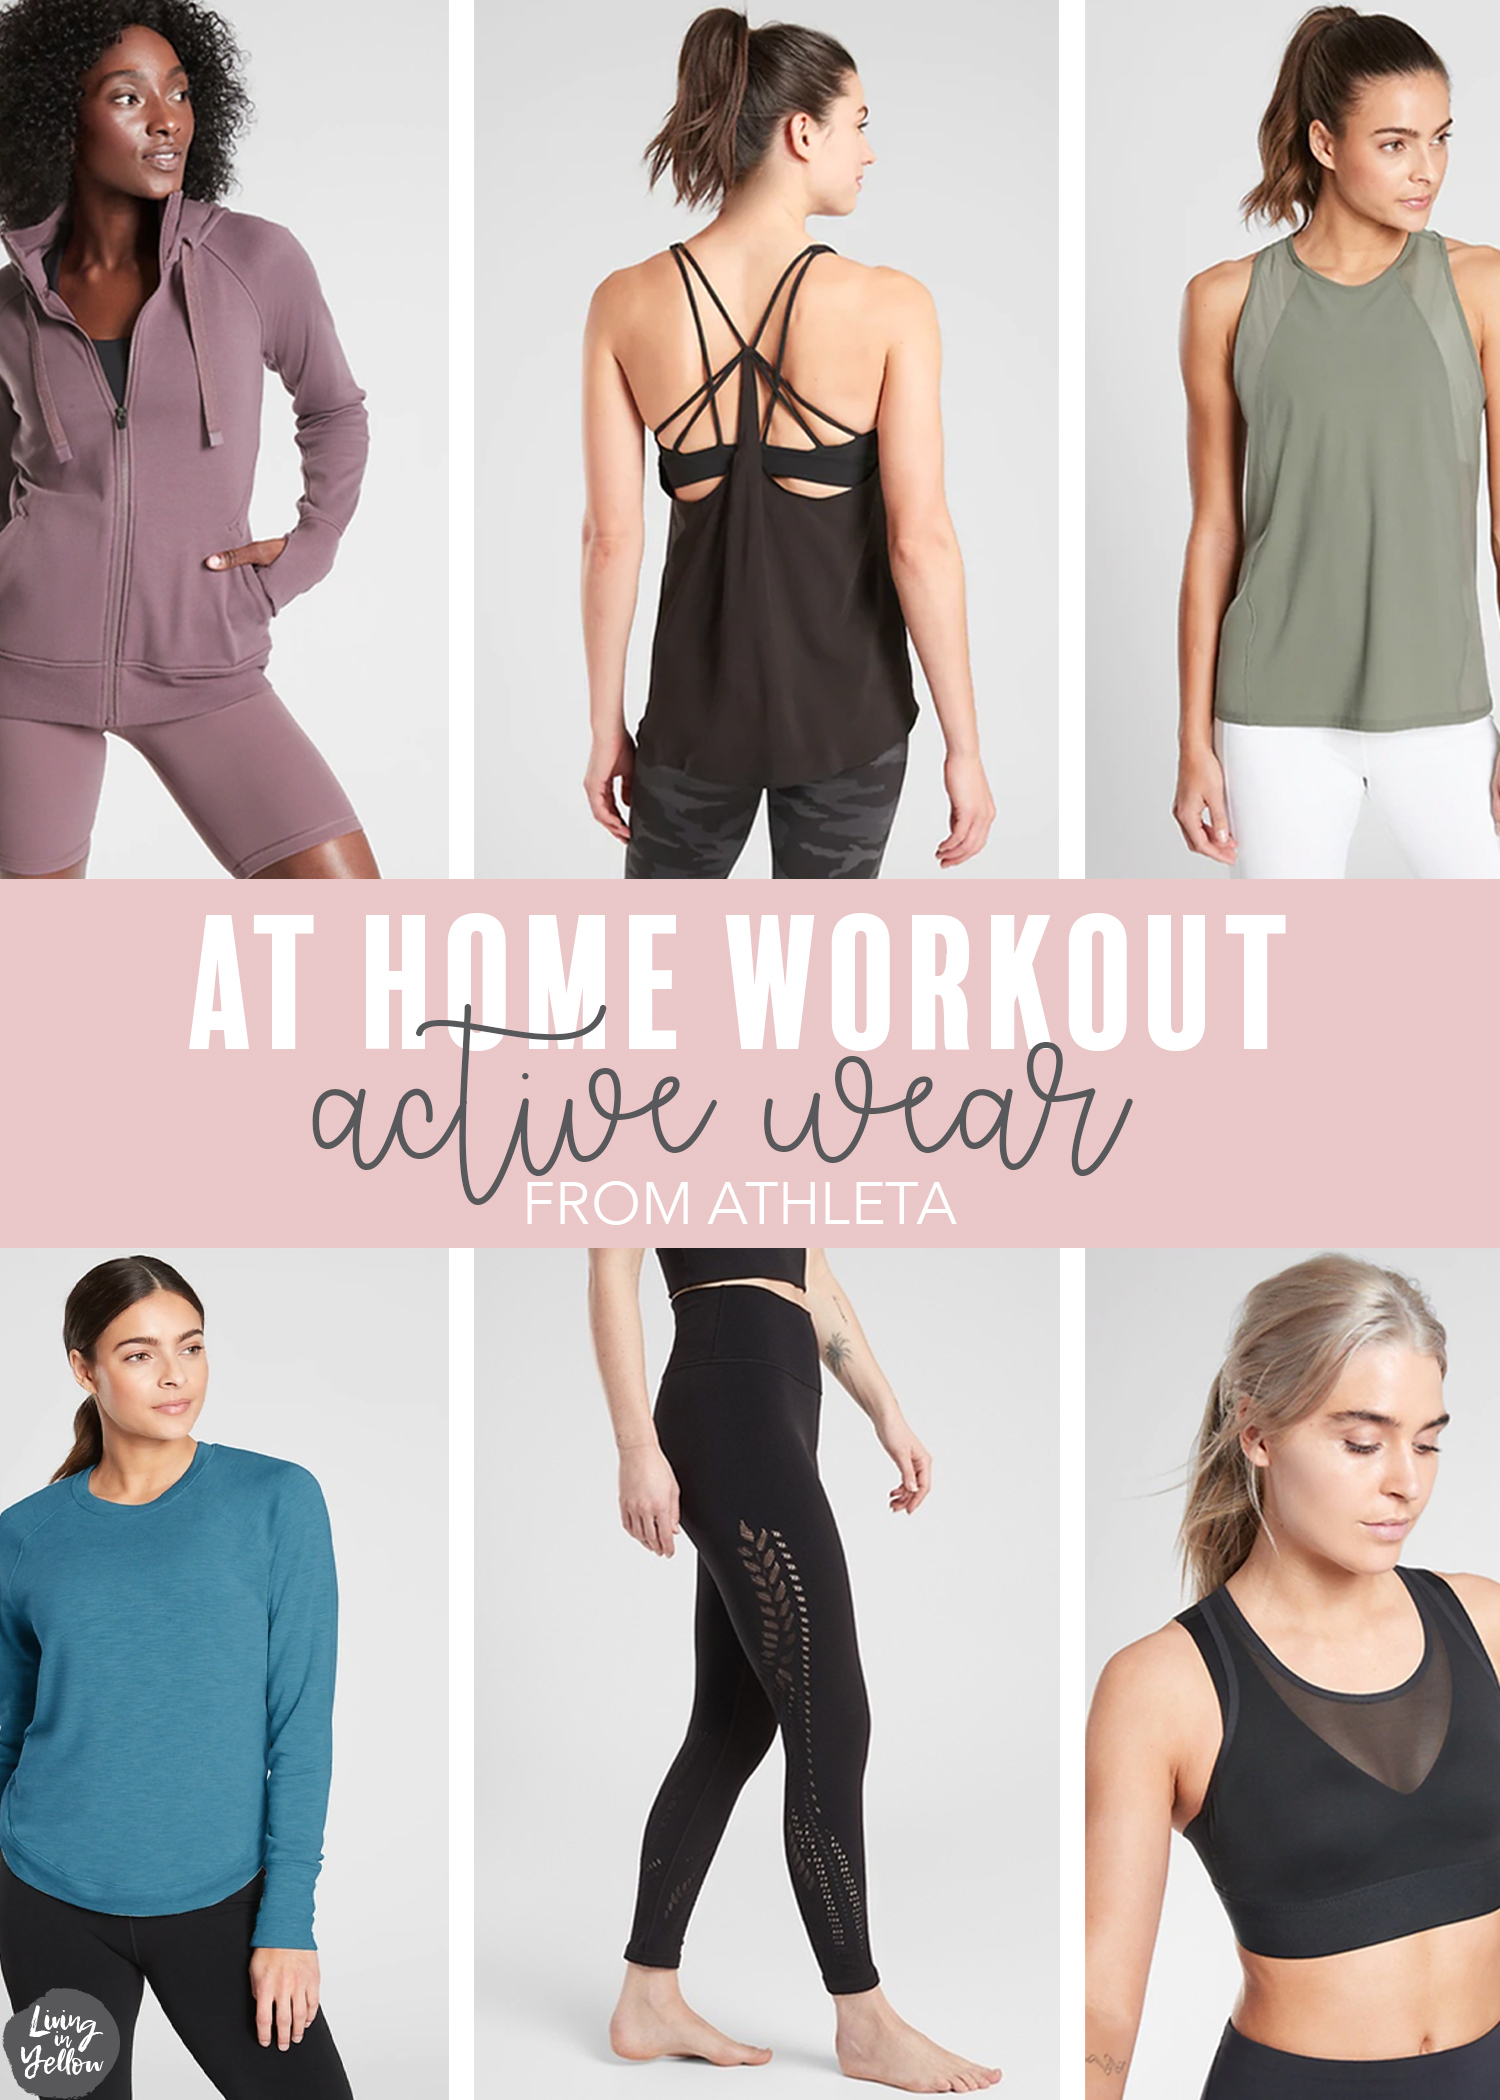 https://livinginyellow.com/wp-content/uploads/2020/05/Athleta-Collage-At-Home-Workout.jpg